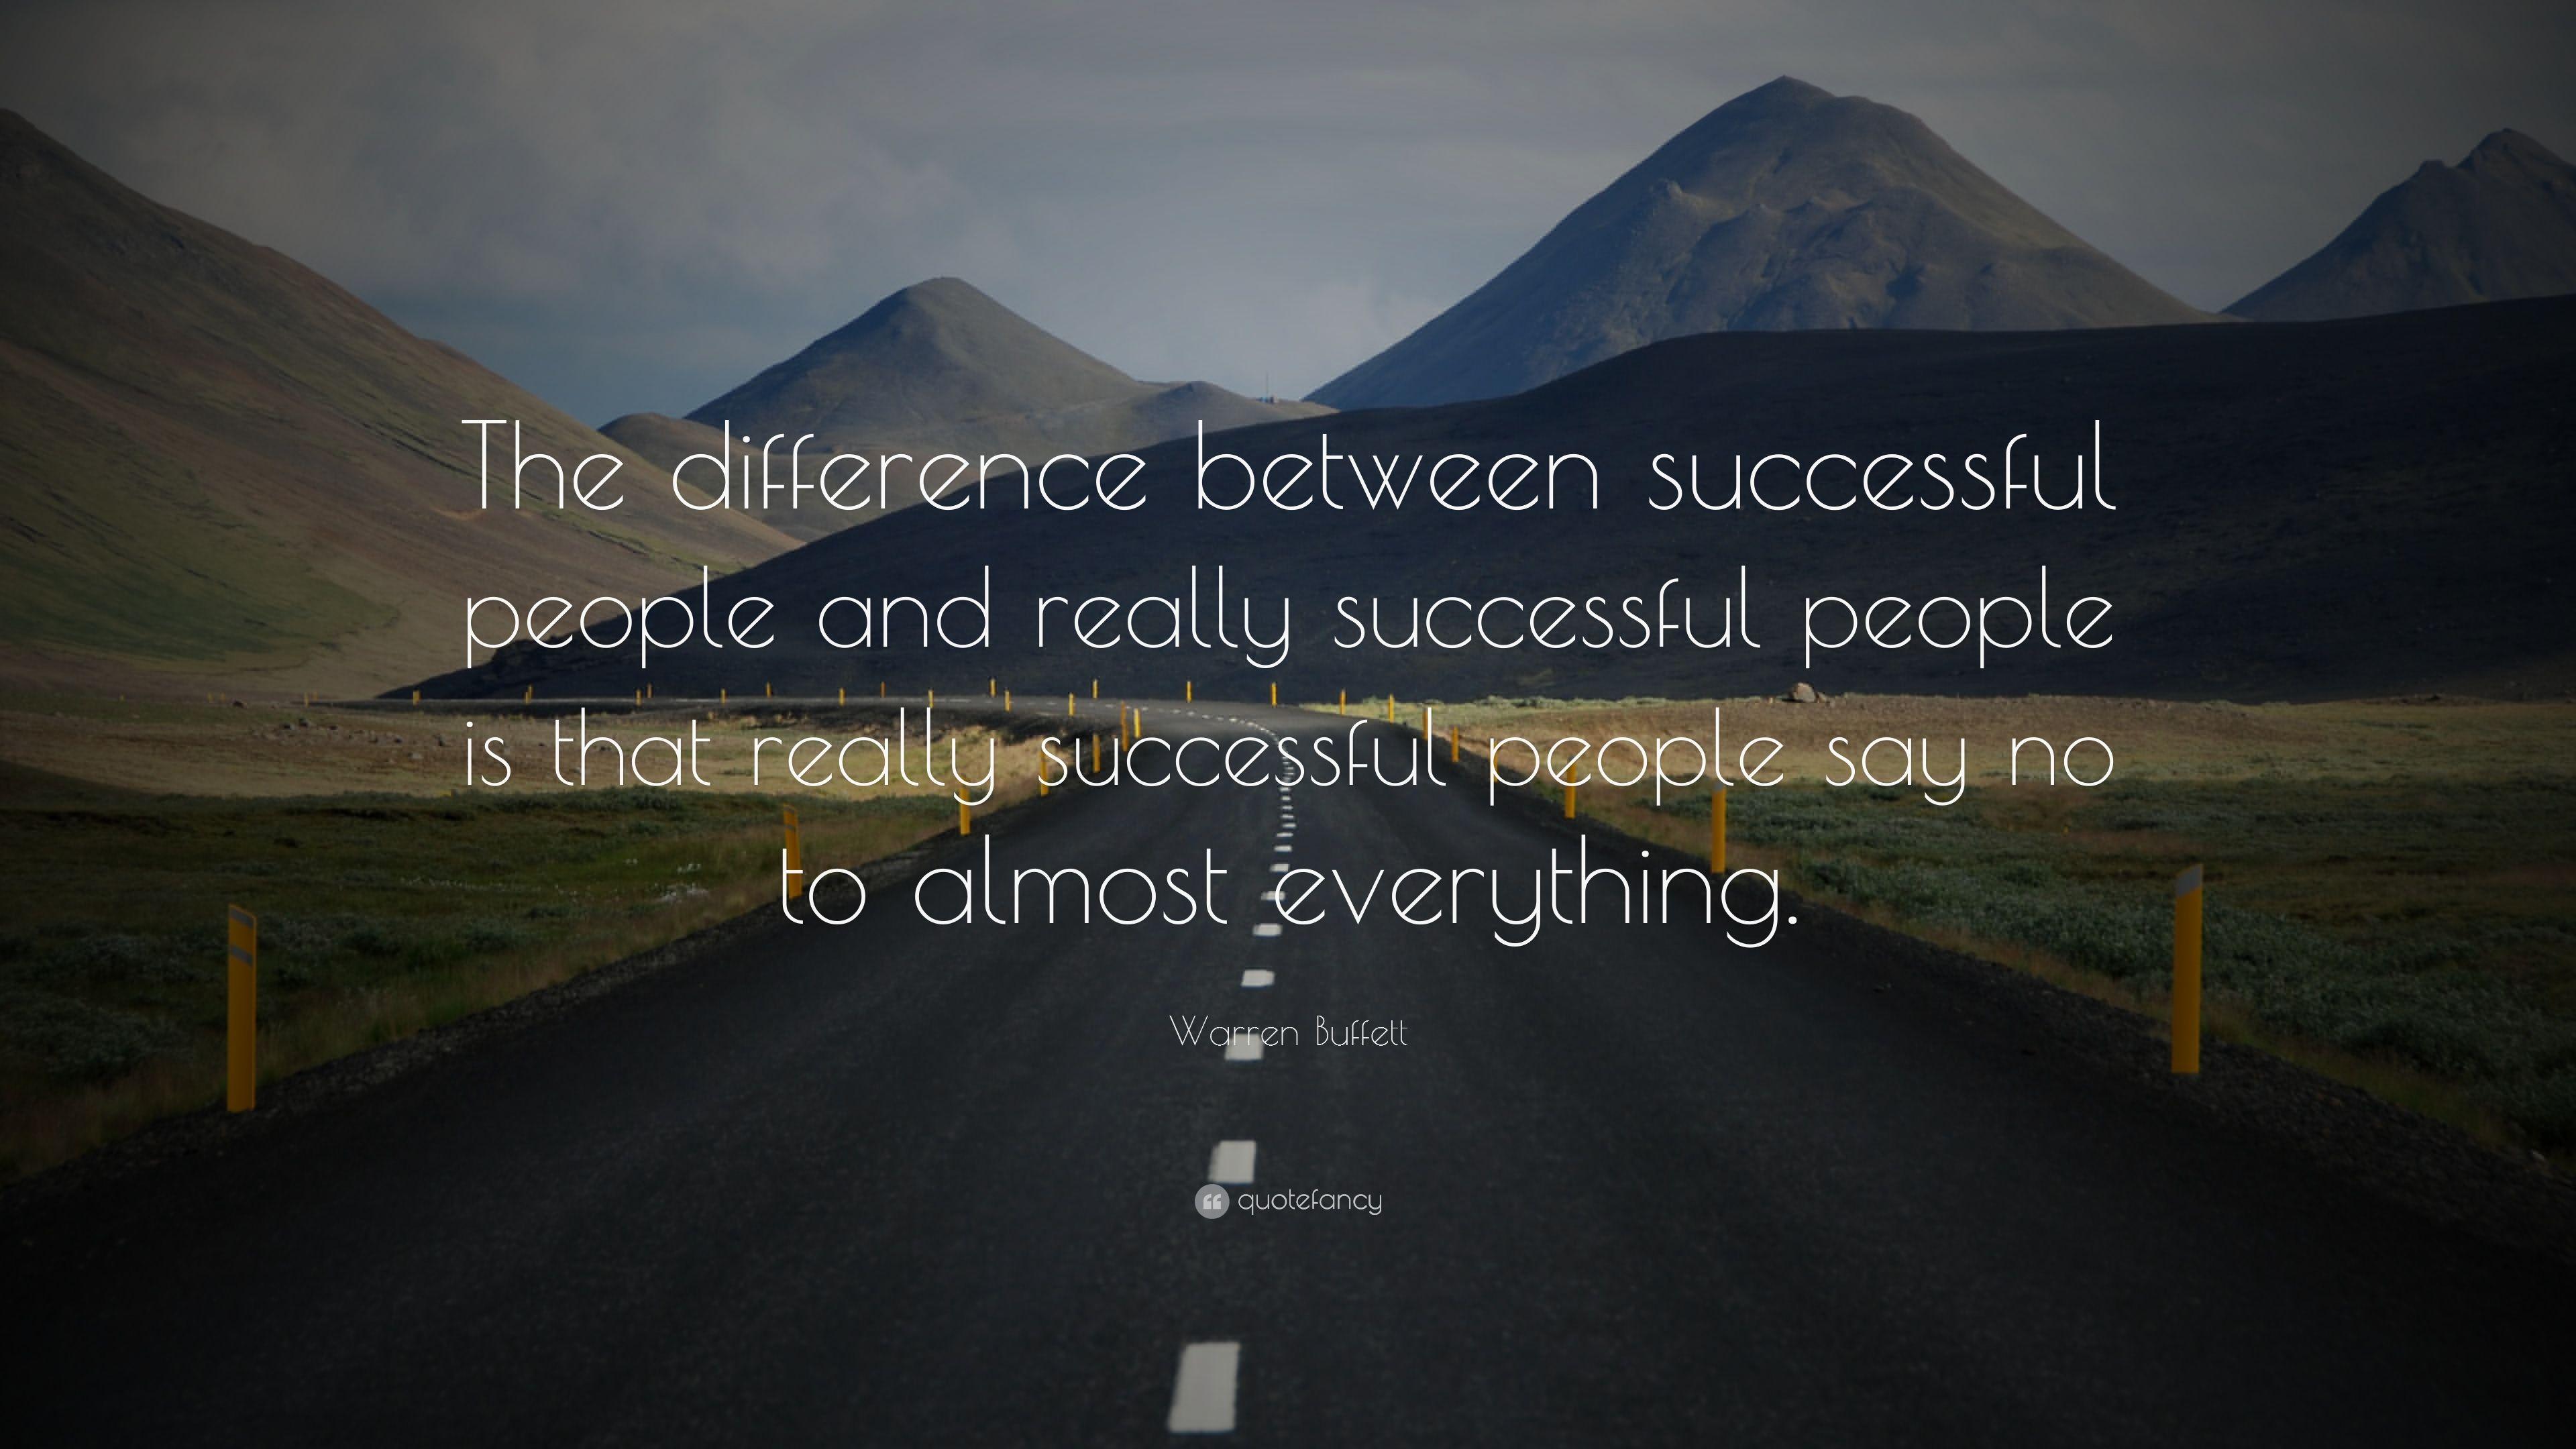 Warren Buffett Quote: “The difference between successful people